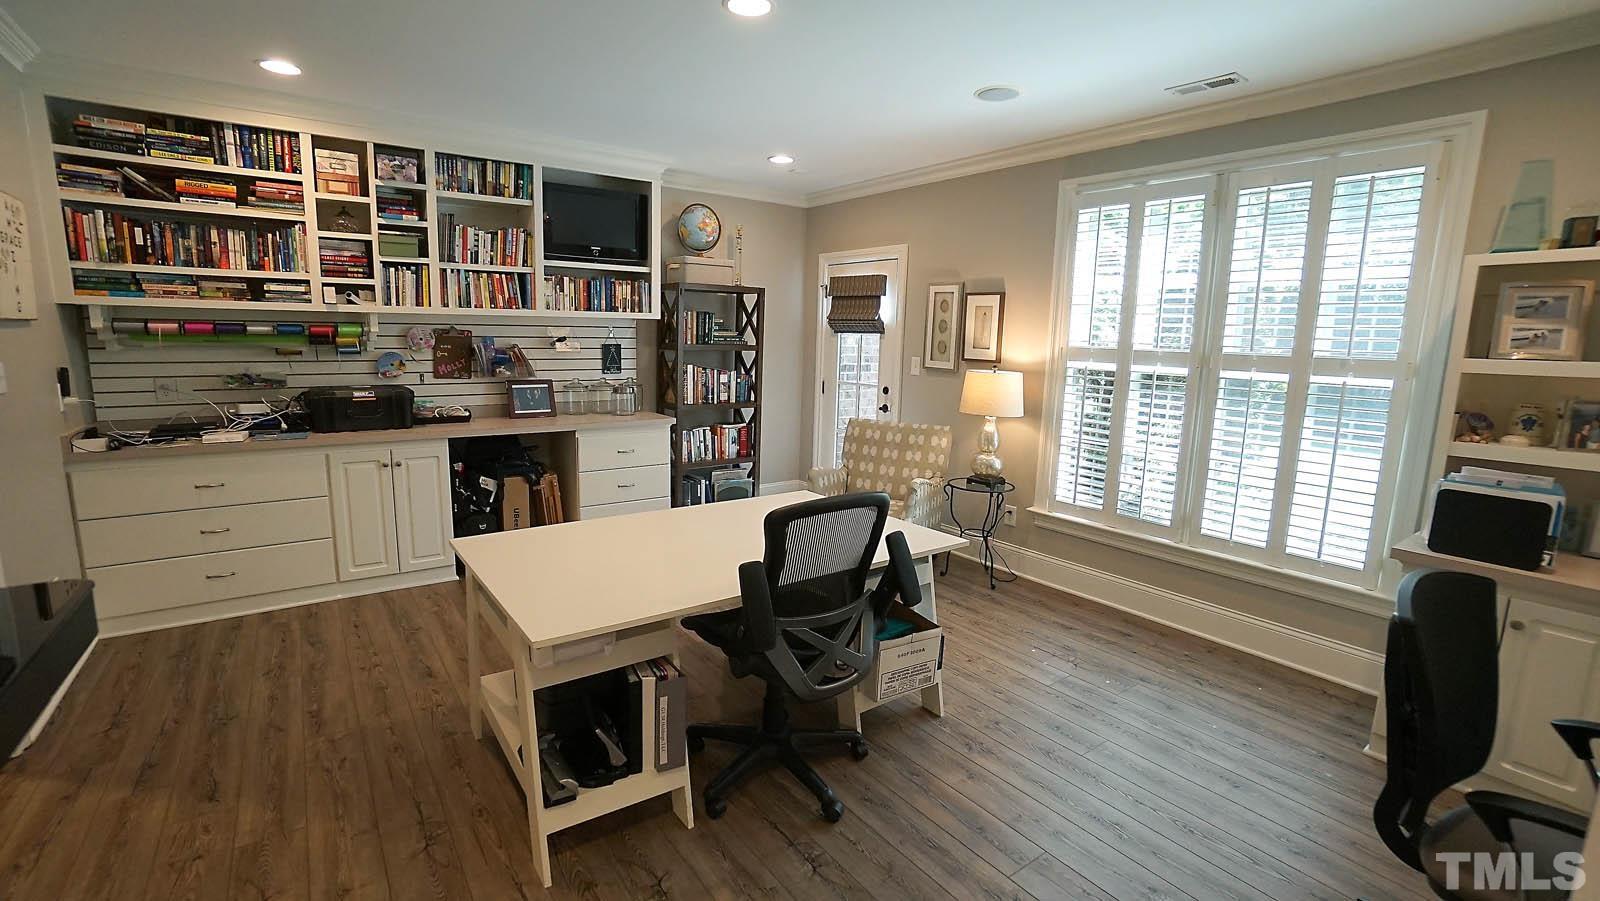 Large office-craft room with tons of windows gorgeous views of backyard.  Built in shelves lots of storage.